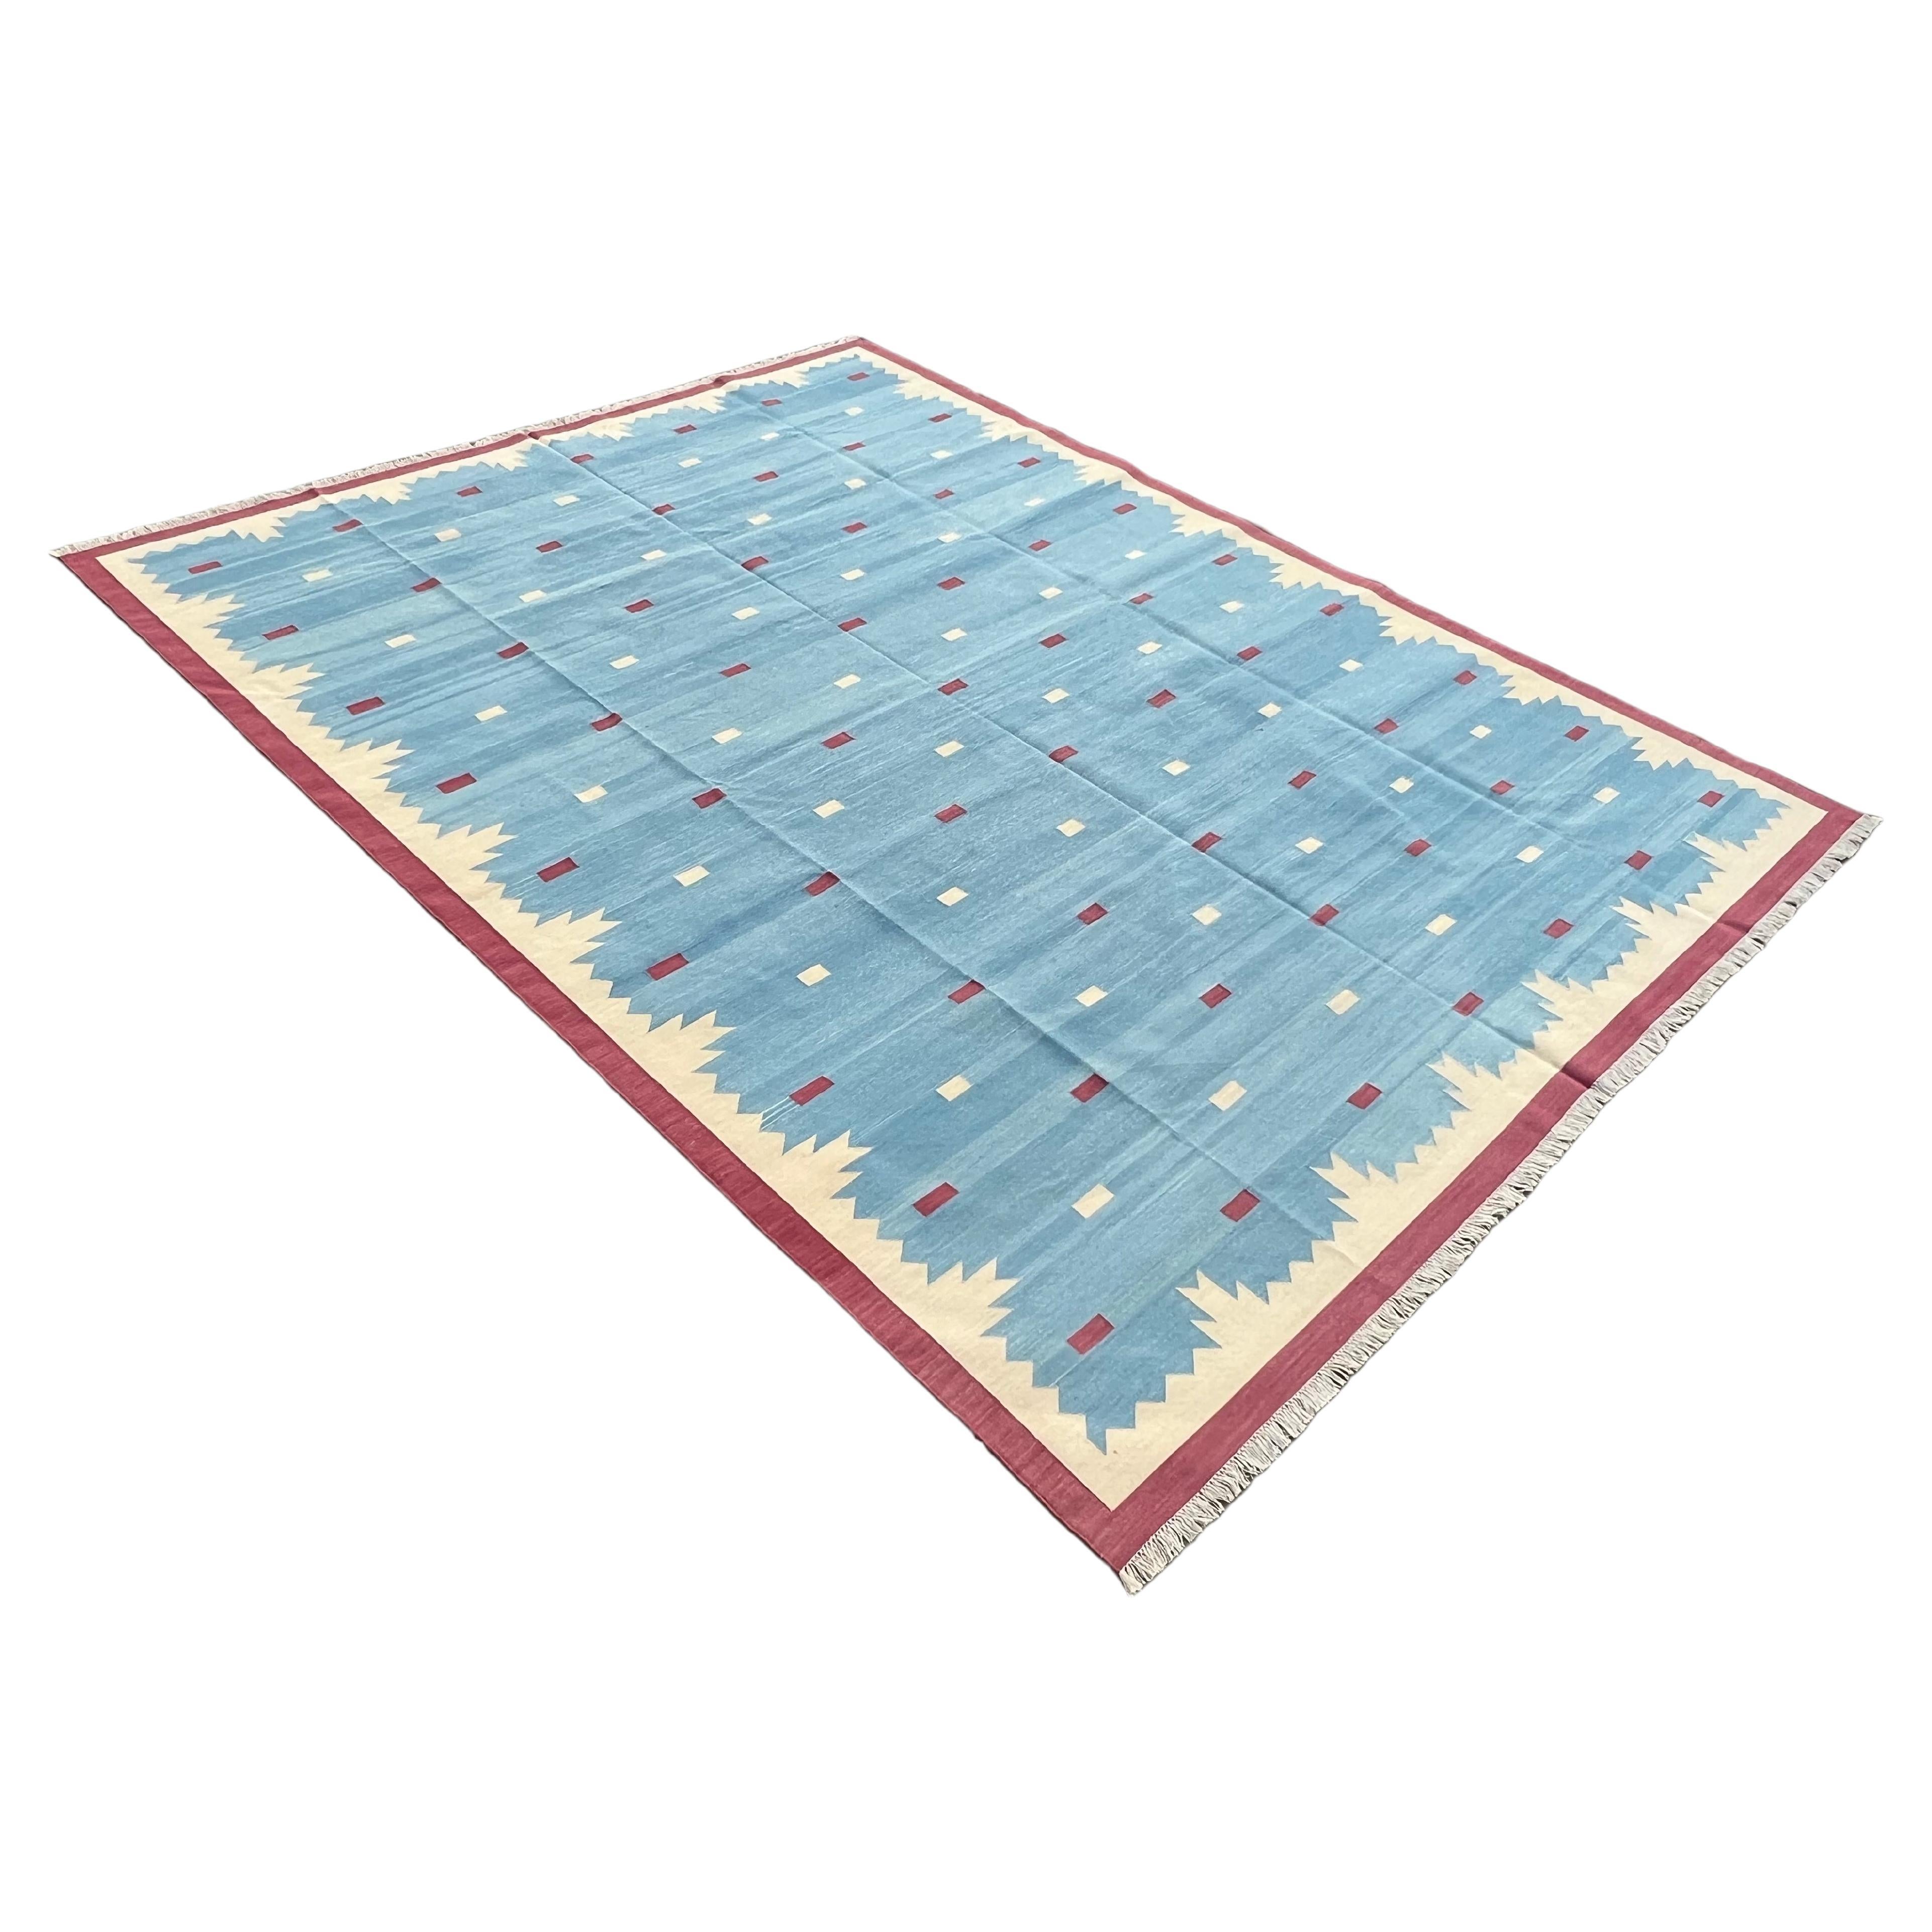 Handmade Cotton Area Flat Weave Rug, Blue And Pink Geometric Indian Dhurrie Rug For Sale